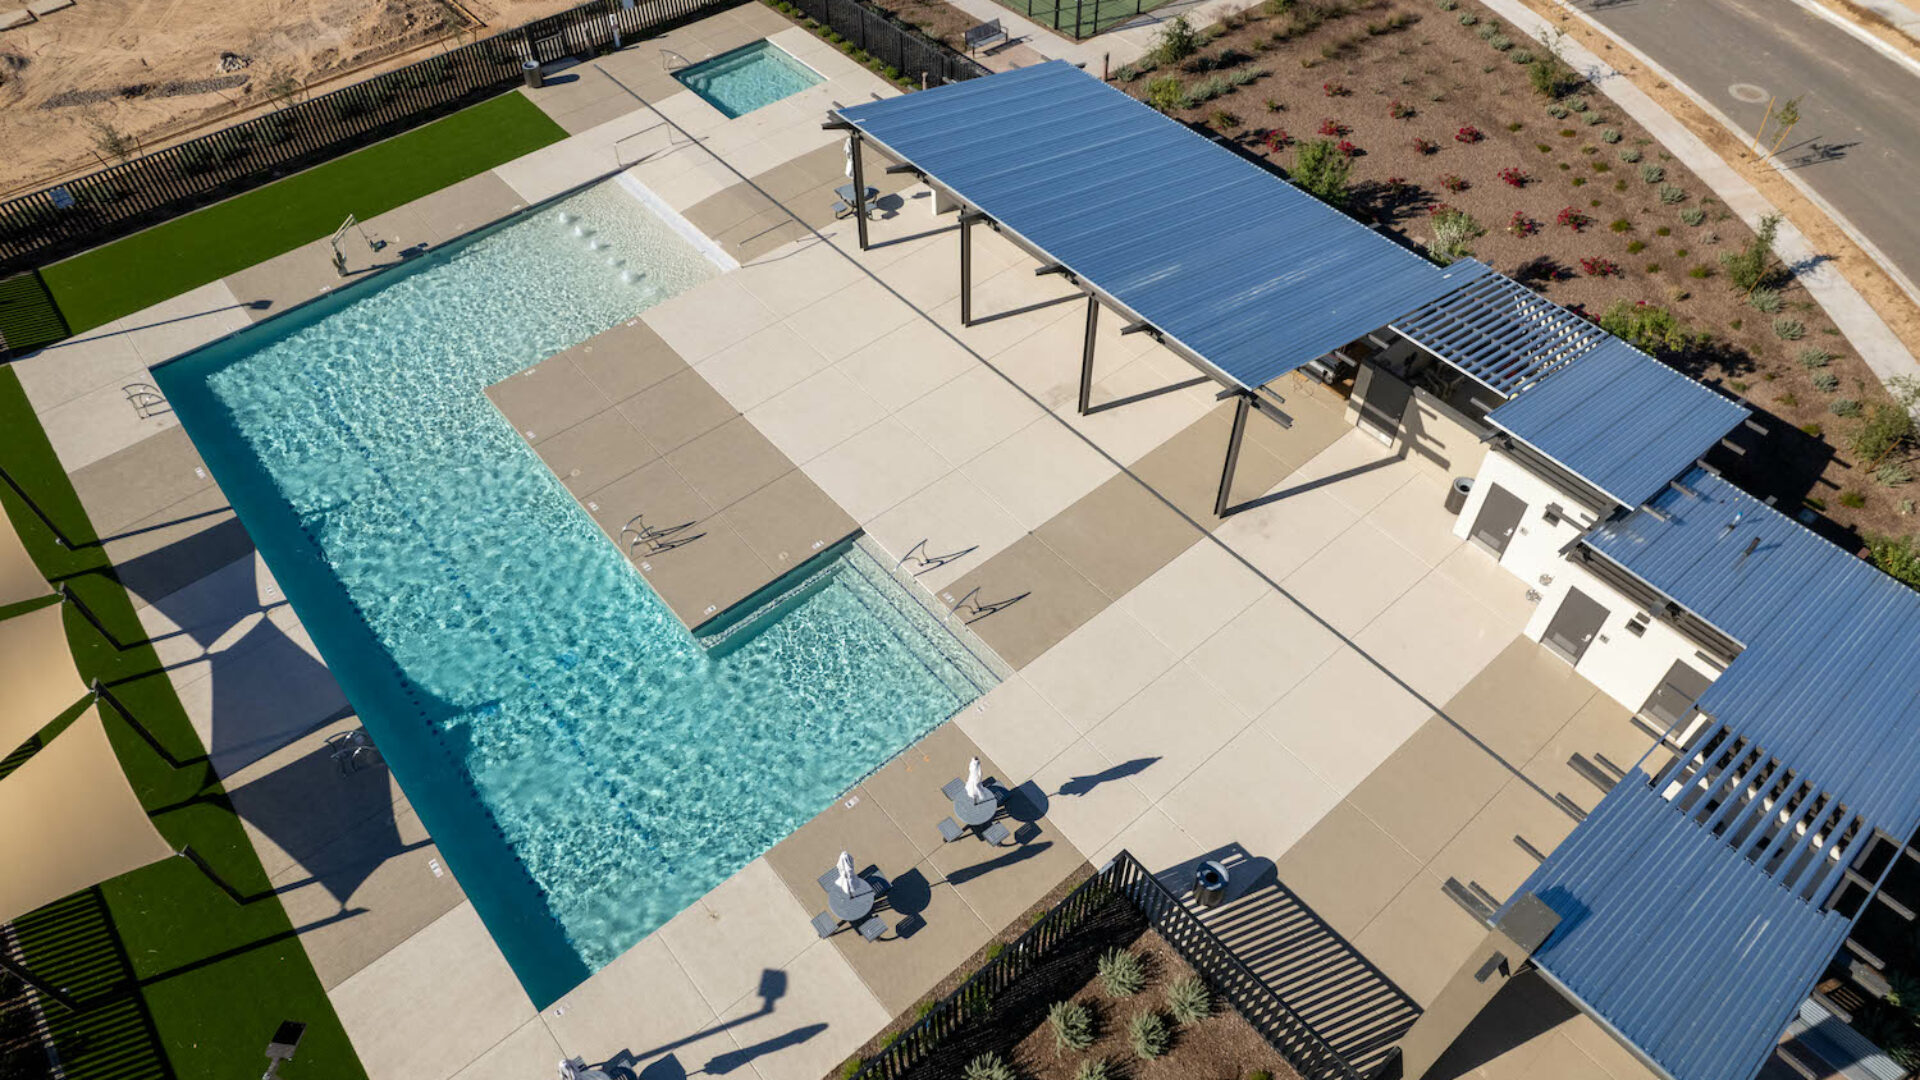 Community amenities at the Avion master-planned community